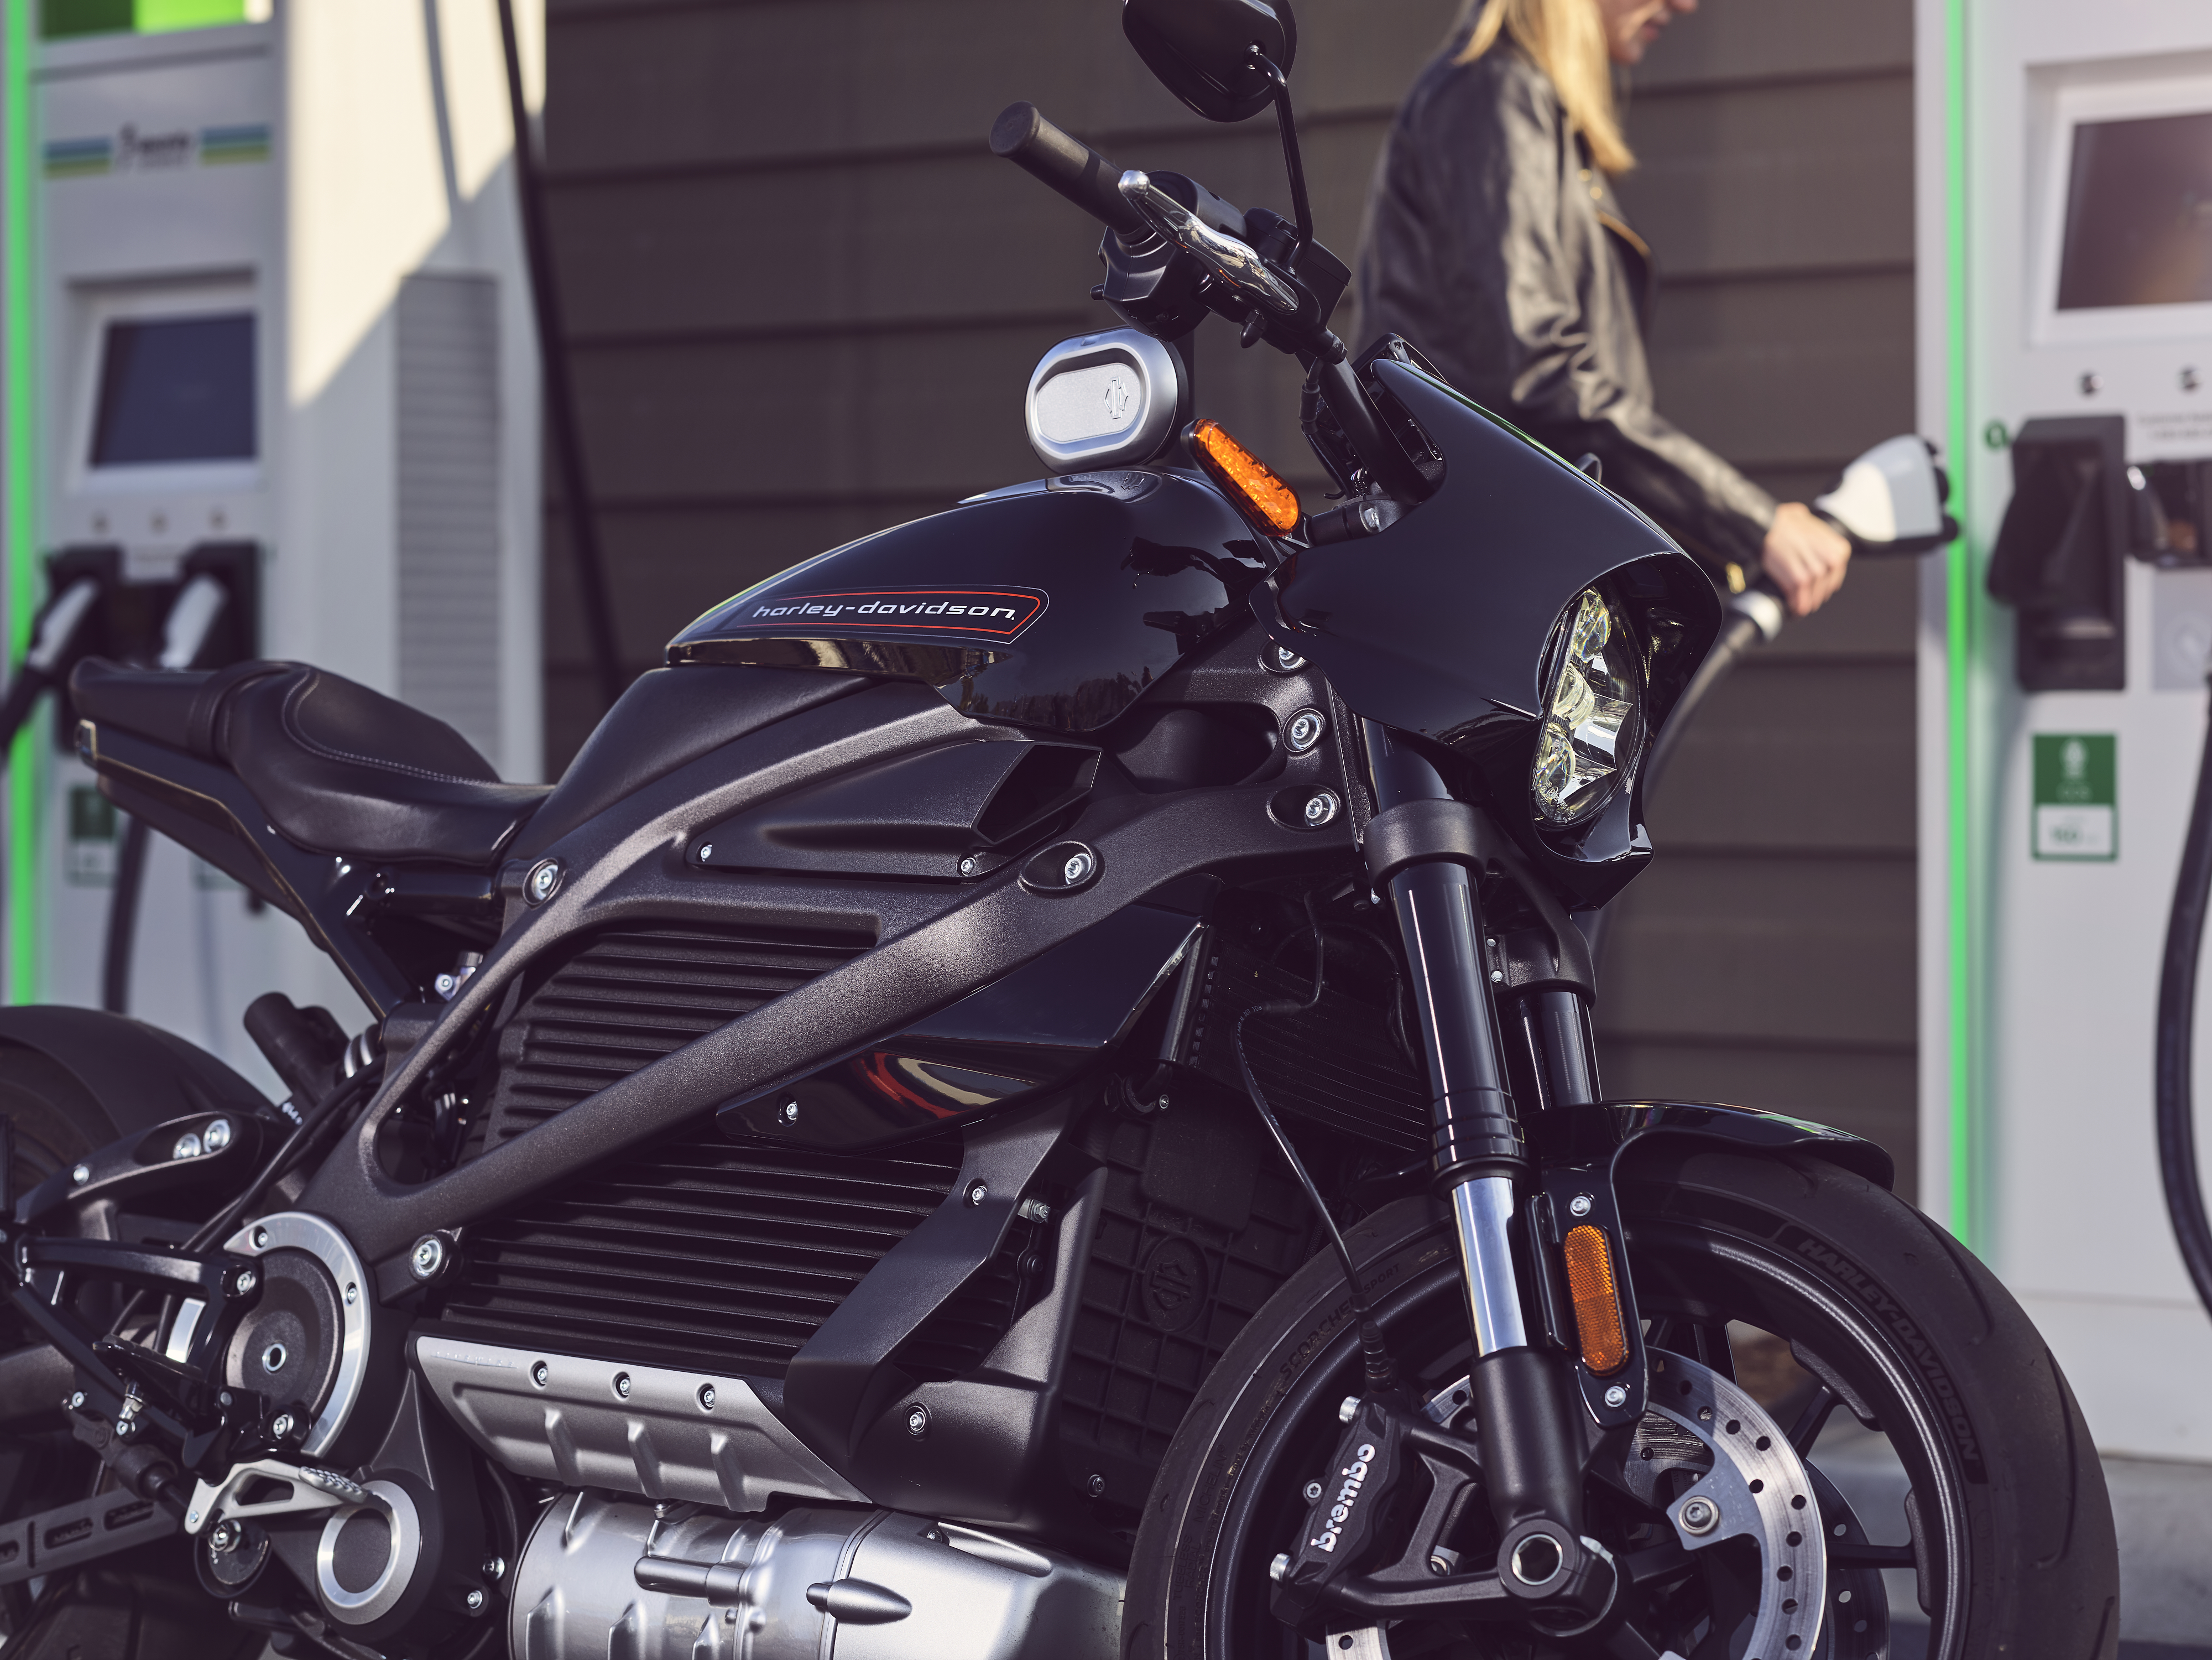 Electrify America providing free charging to Harley  